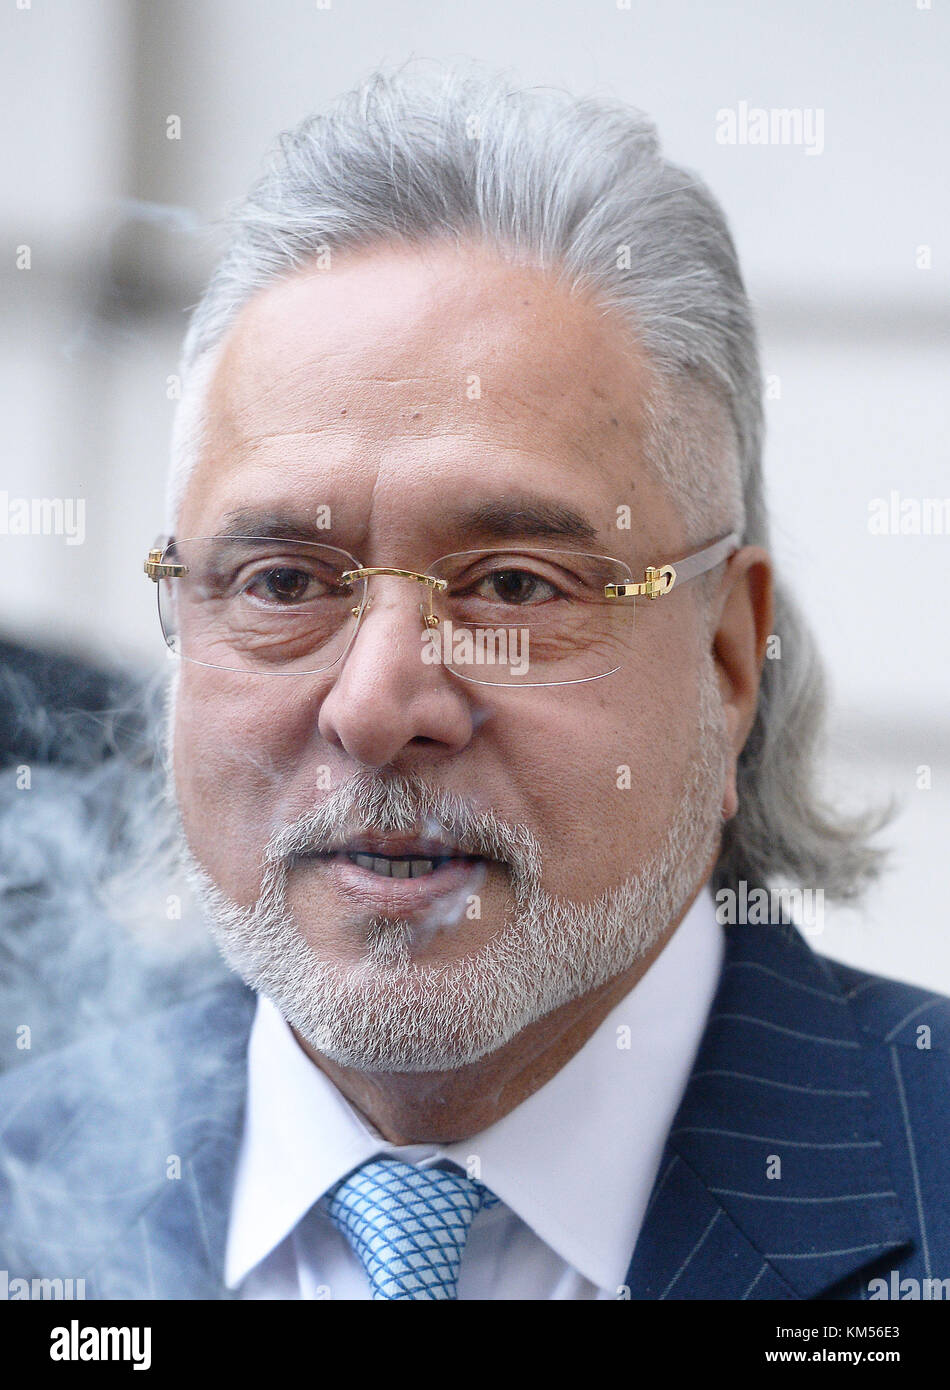 Indian business tycoon Vijay Mallya, who is wanted in his home country over  fraud allegations, outside Westminster Magistrates' Court during an  extradition hearing Stock Photo - Alamy